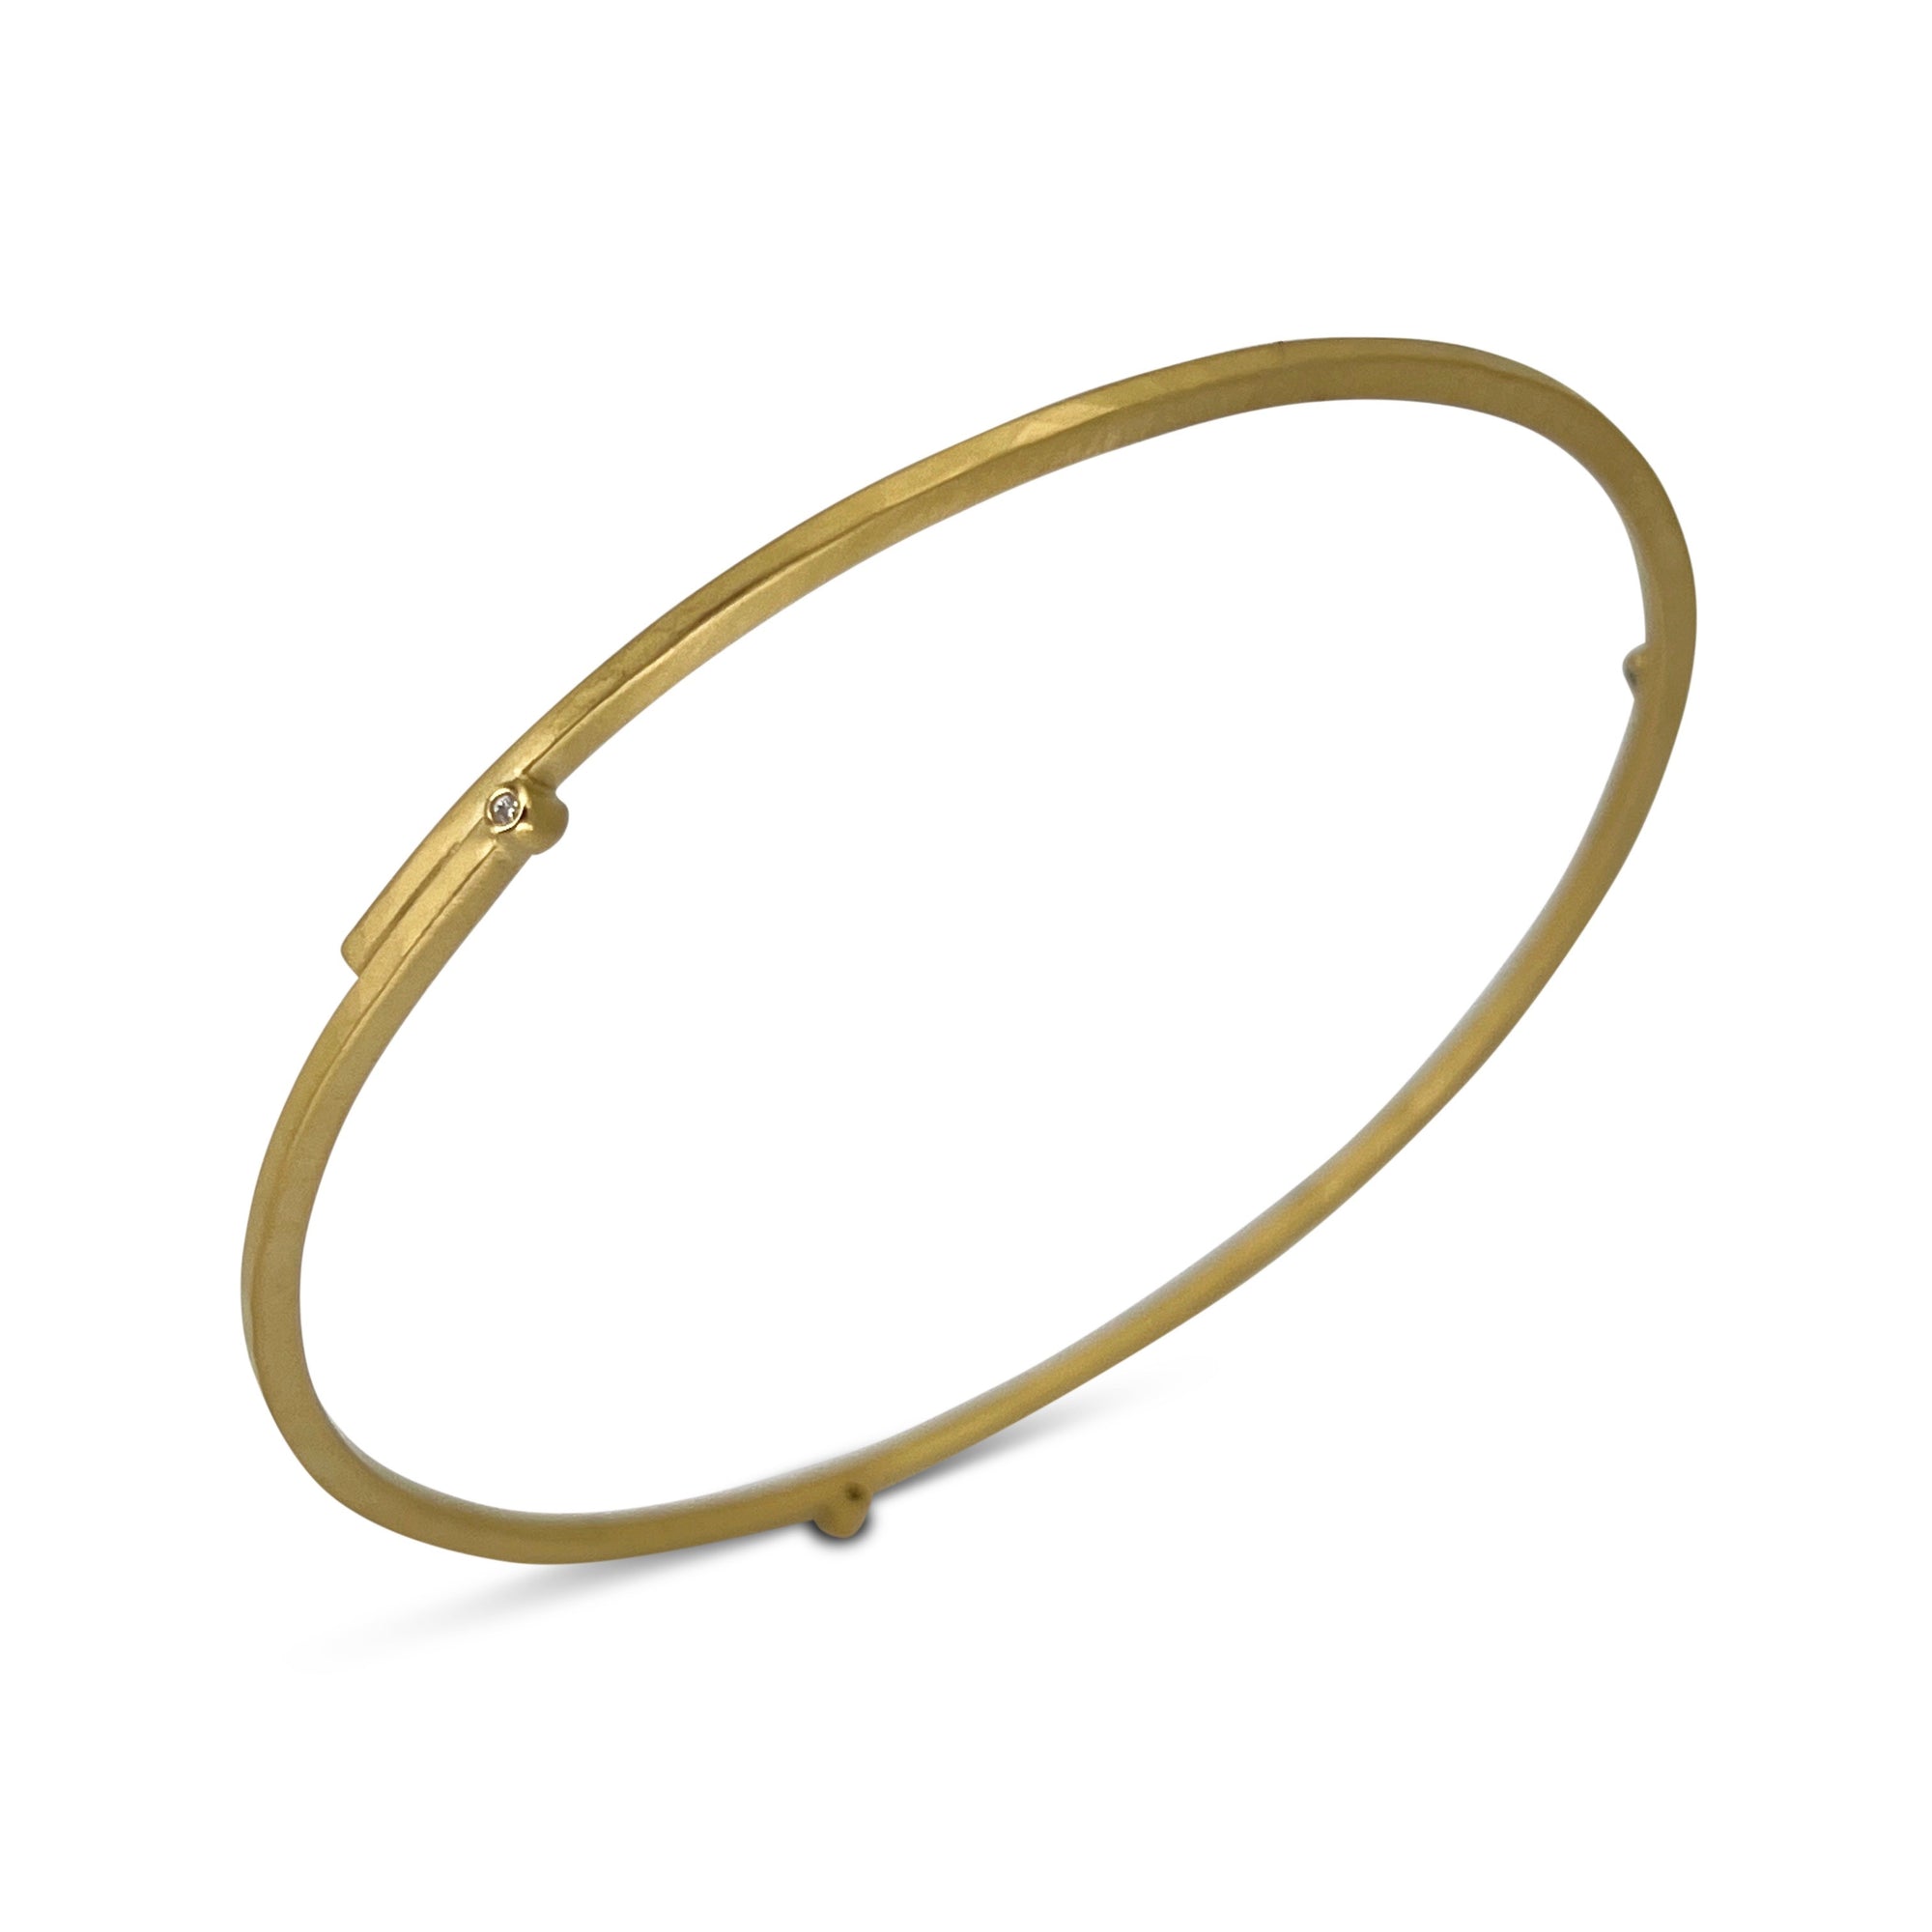 Stepped stackable Bangle bracelet in sterling silver and gold Vermeil finish with 3 diamonds made by Ayesha Mayadas